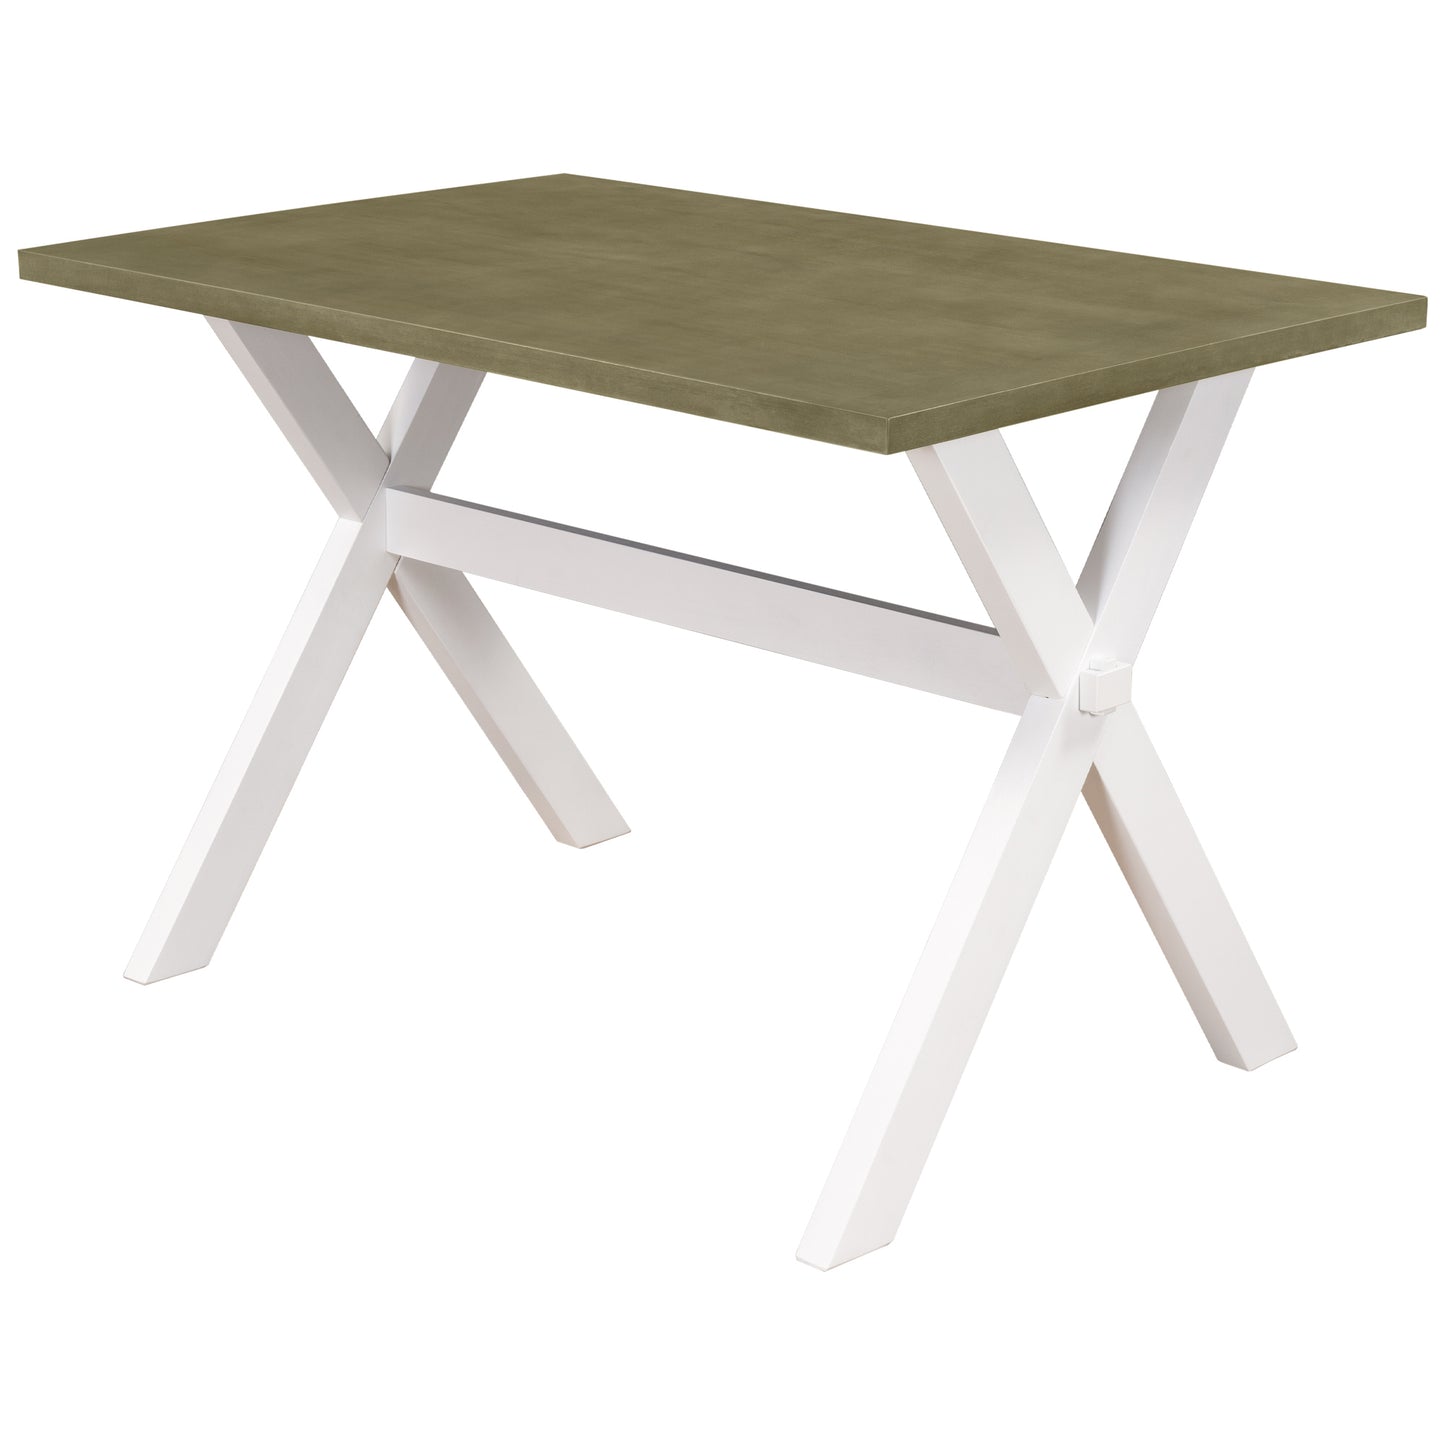 TOPMAX Farmhouse Rustic Wood Kitchen Dining Table with X-shape Legs, Gray Green